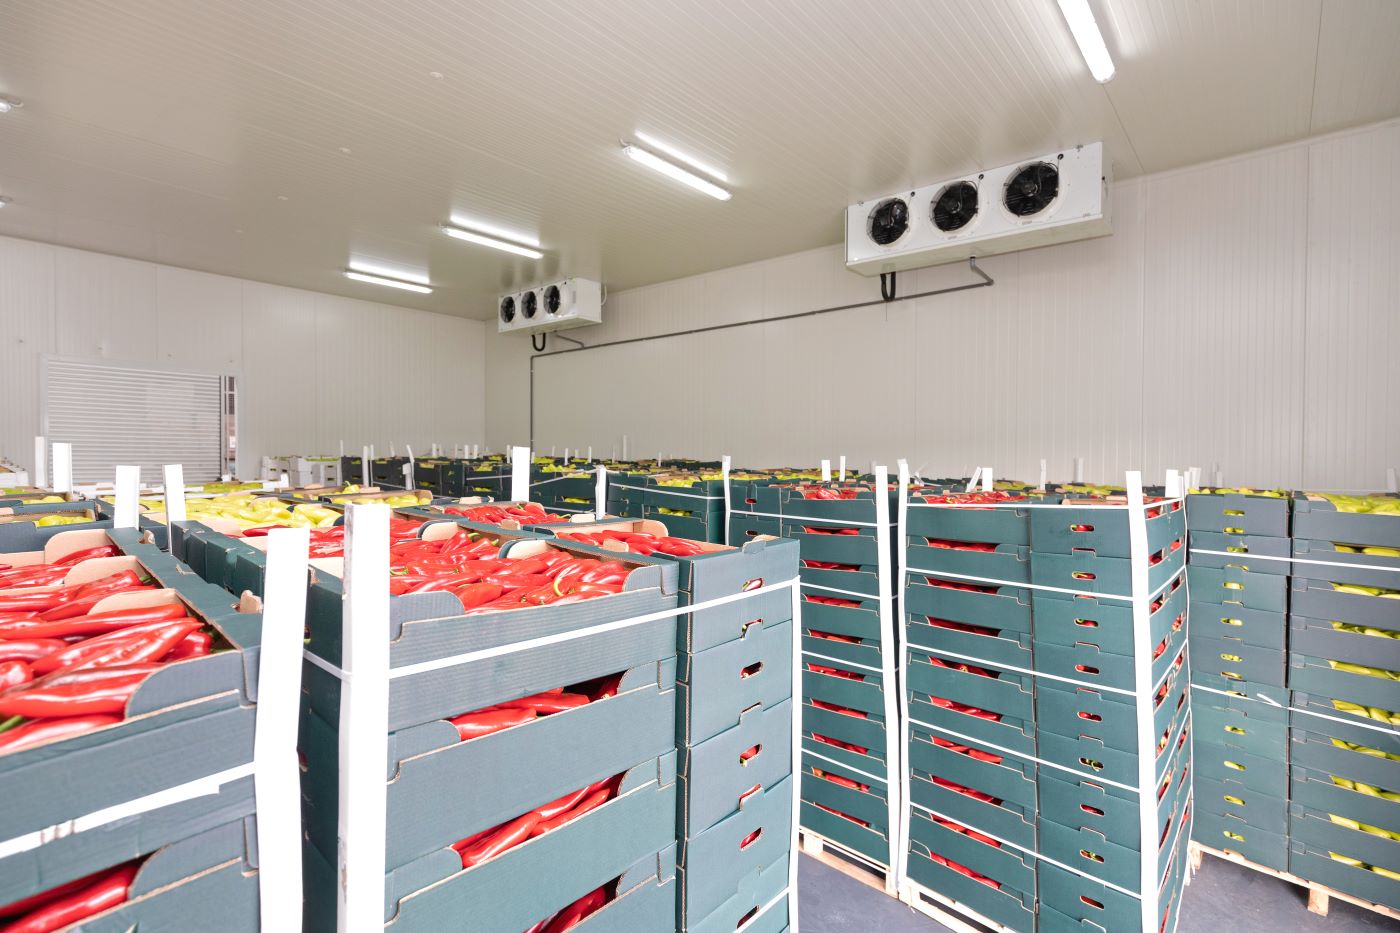 refrigeration unit with fresh produce in boxes